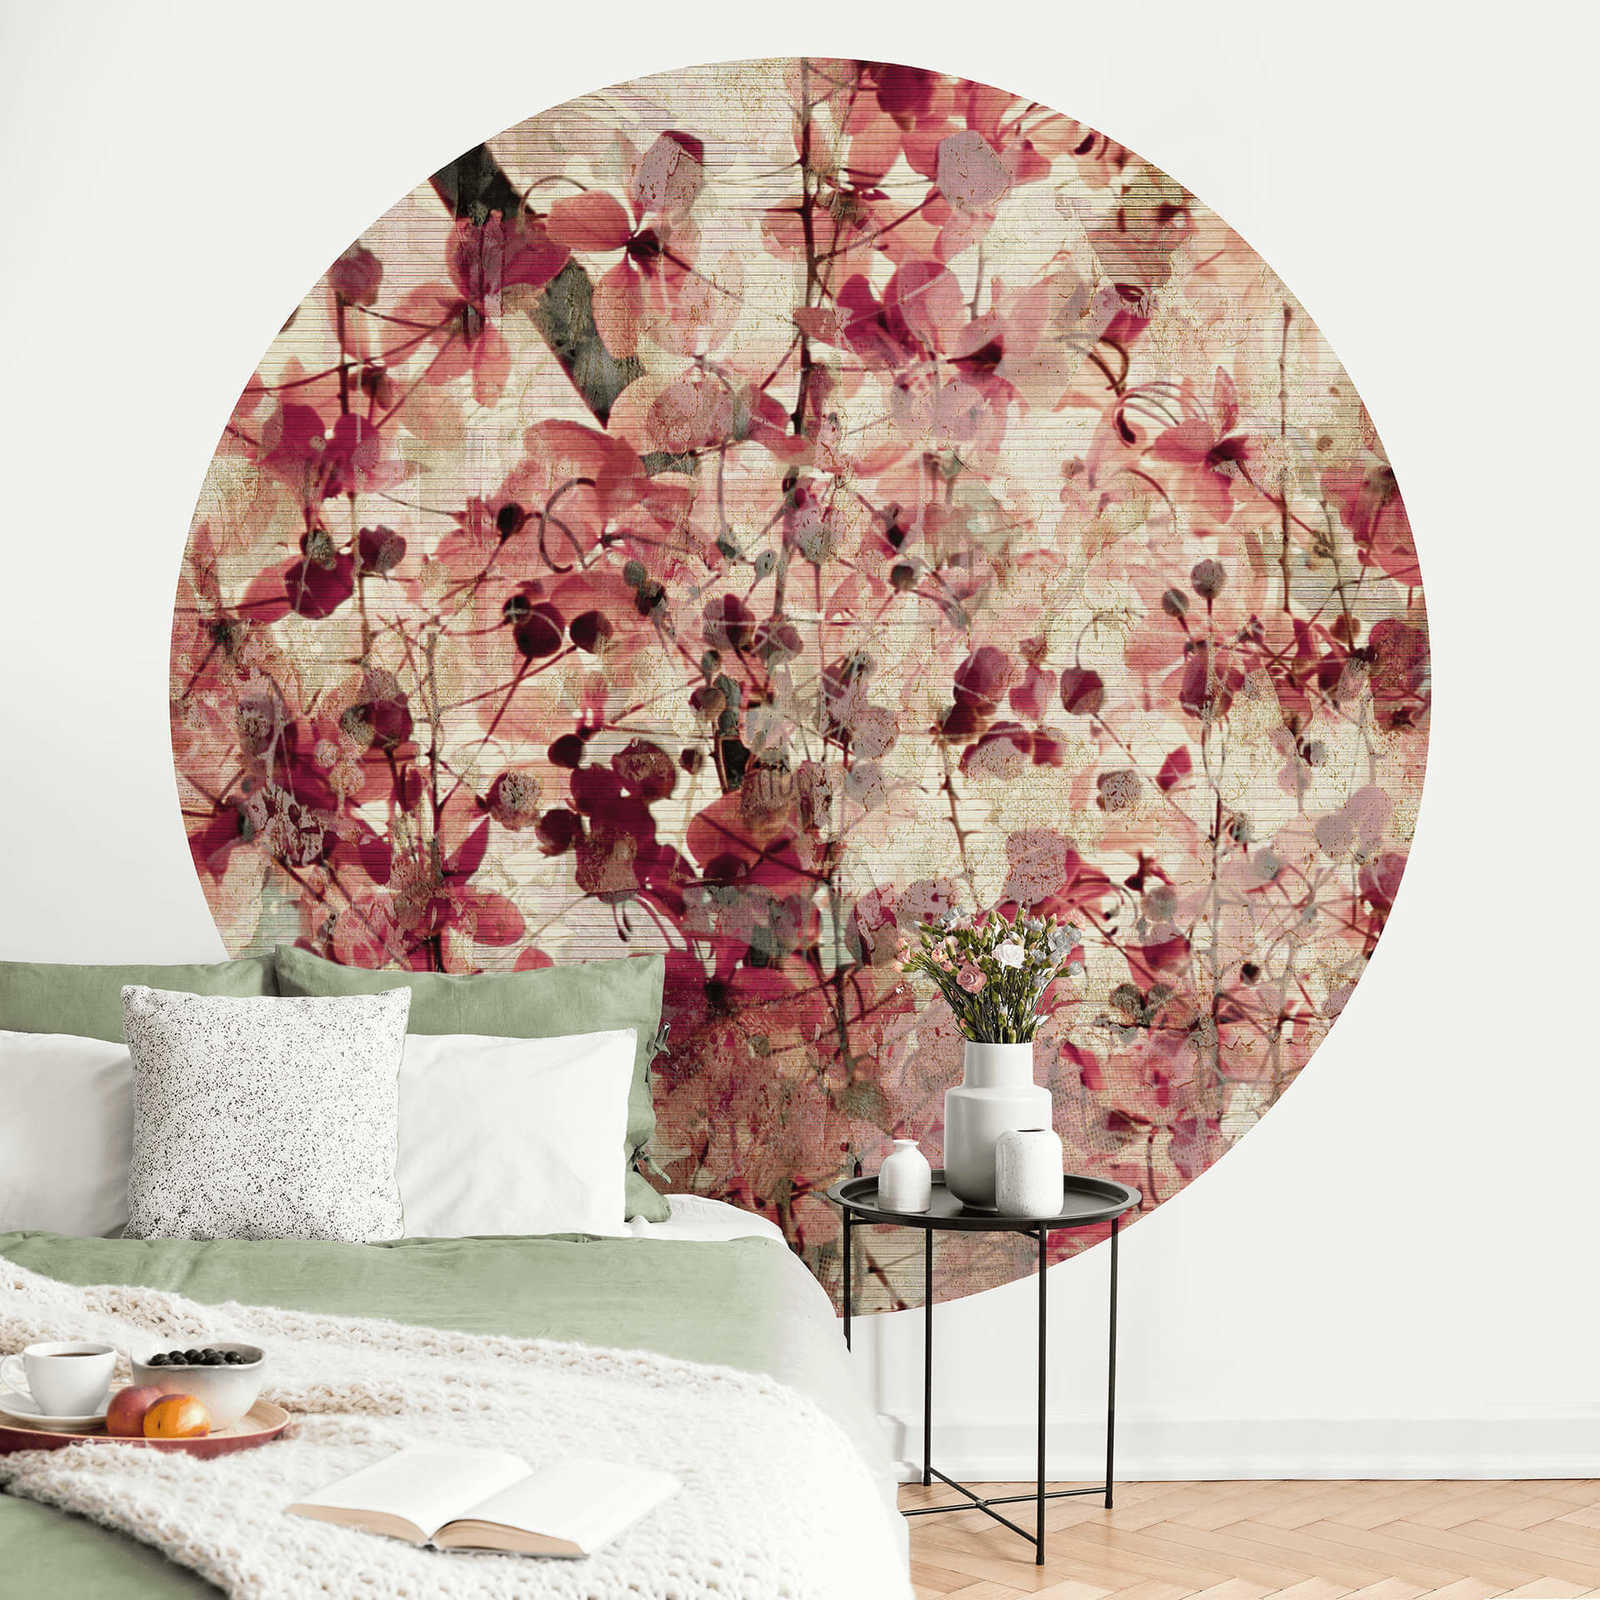             Vintage style round floral pattern mural
        